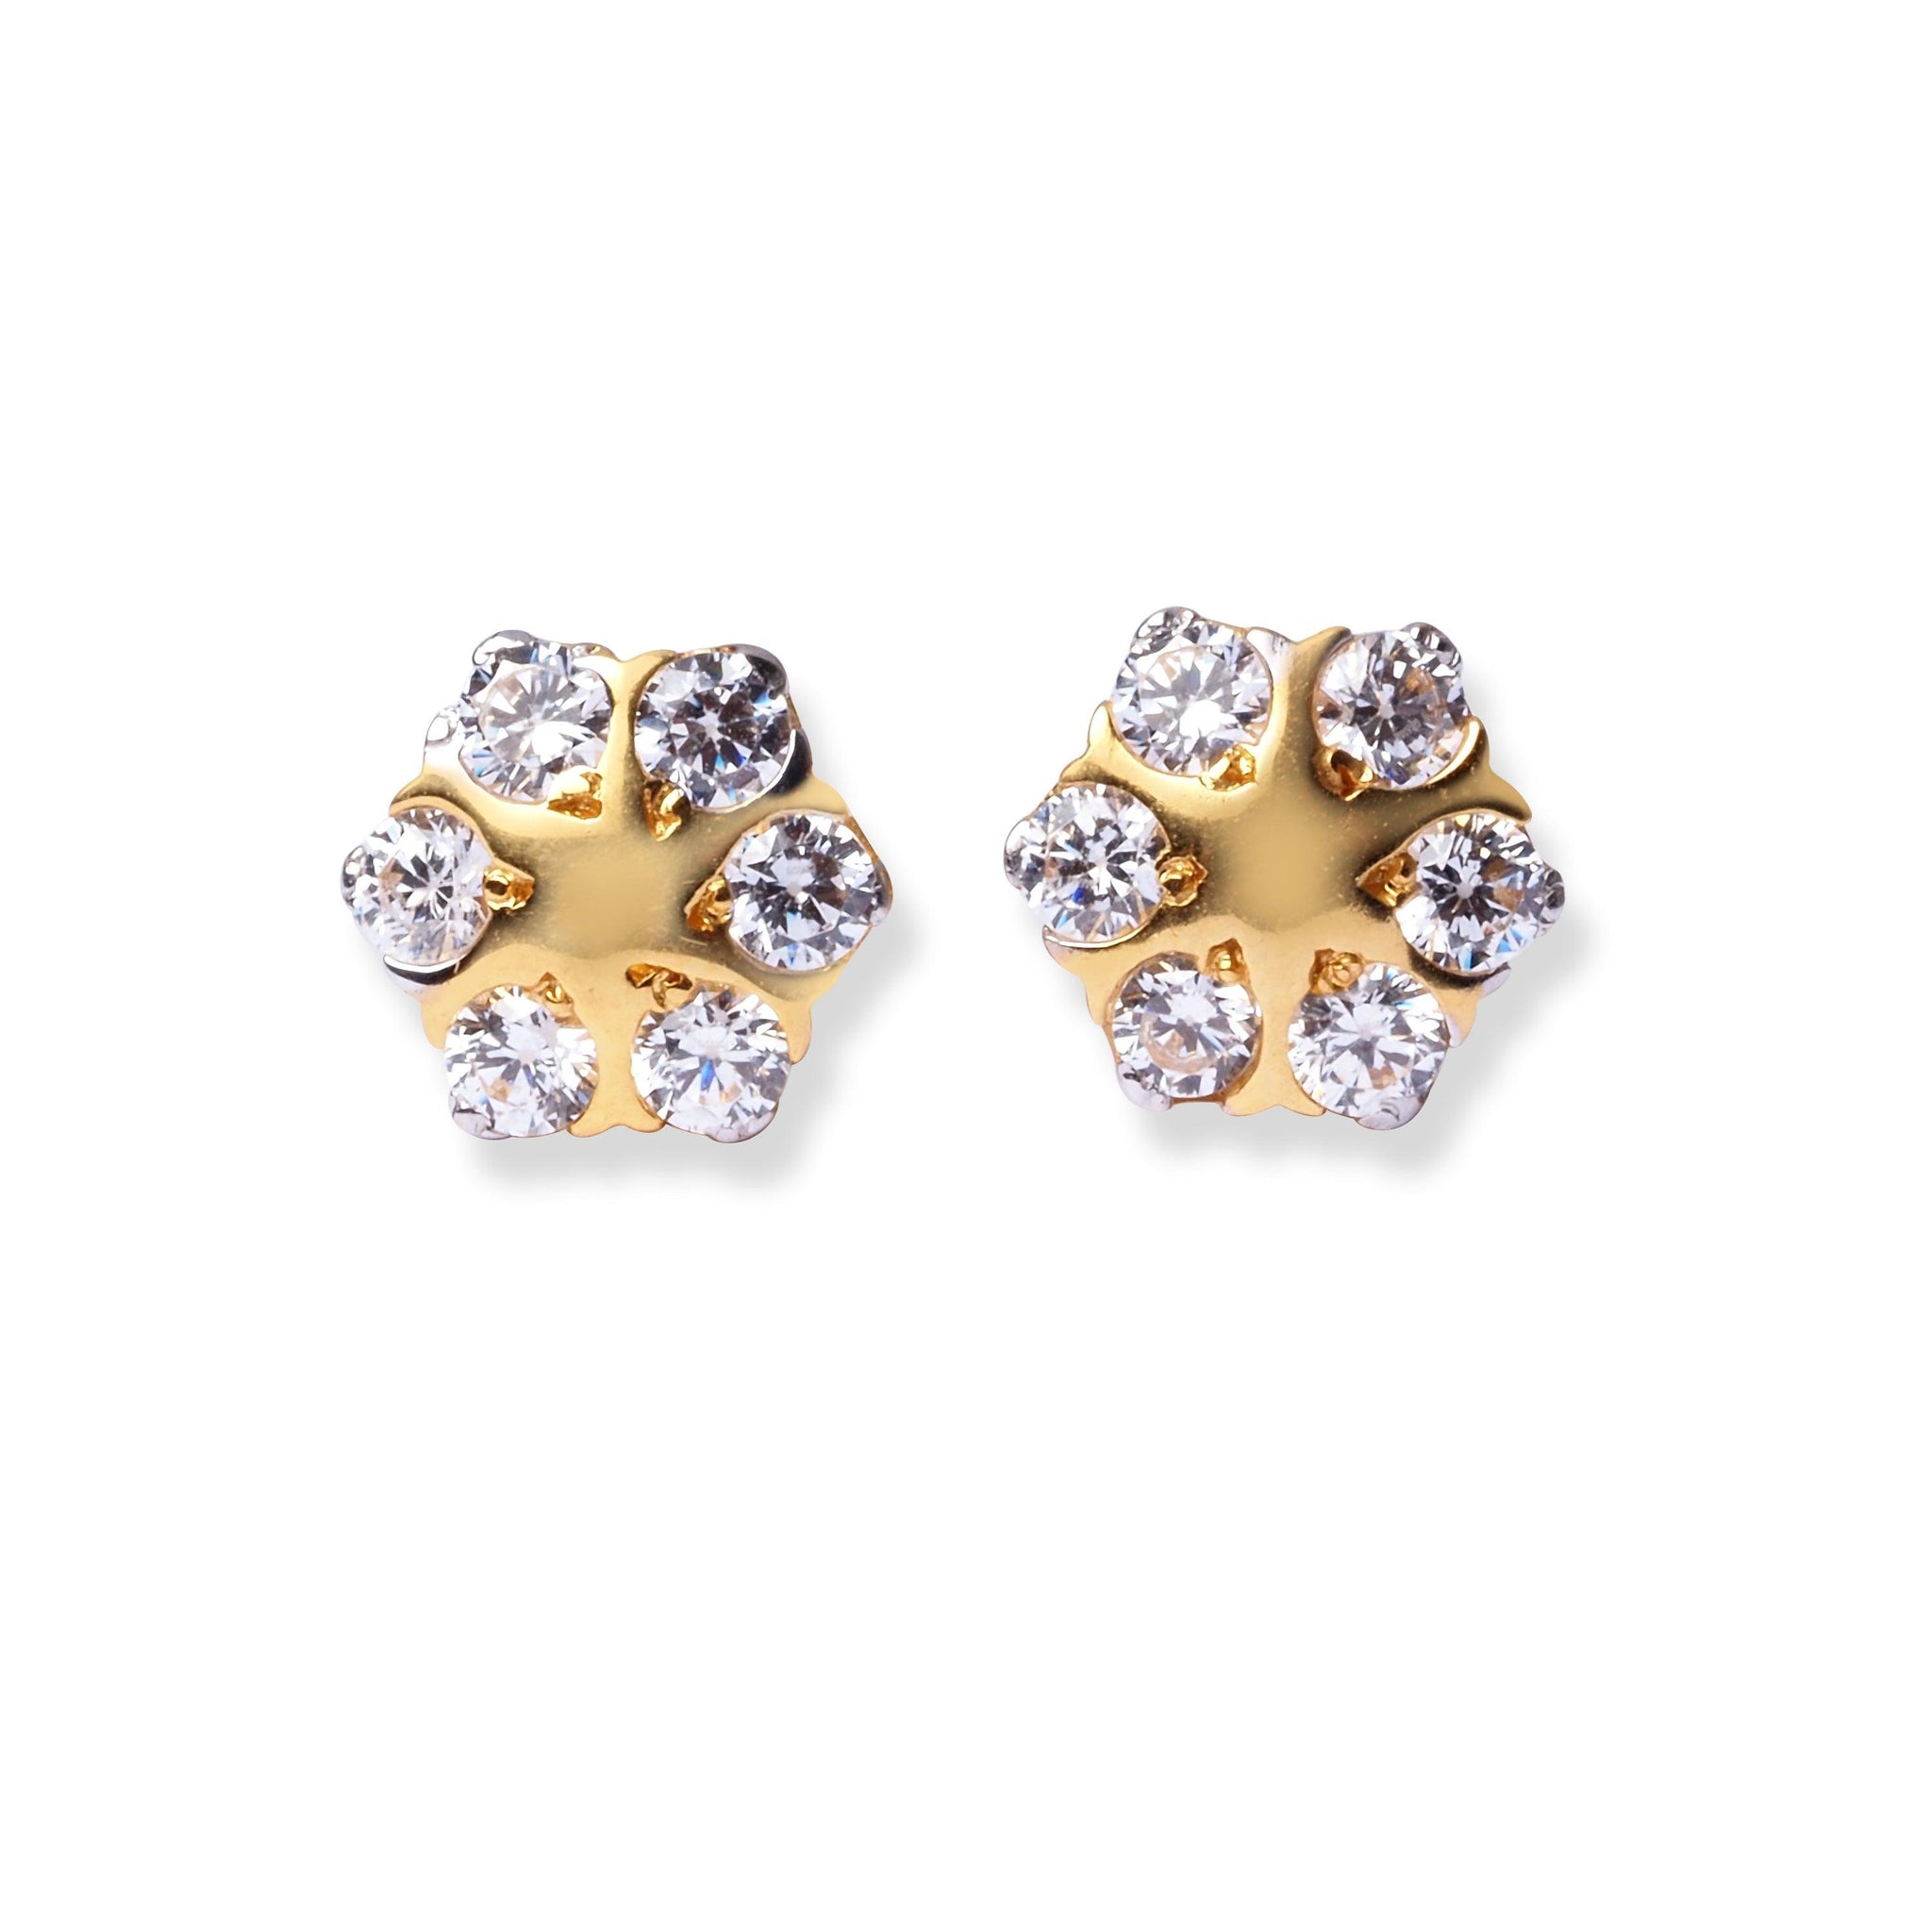 22ct Gold Flower Stud Earrings with Cubic Zirconia Stones E-7966